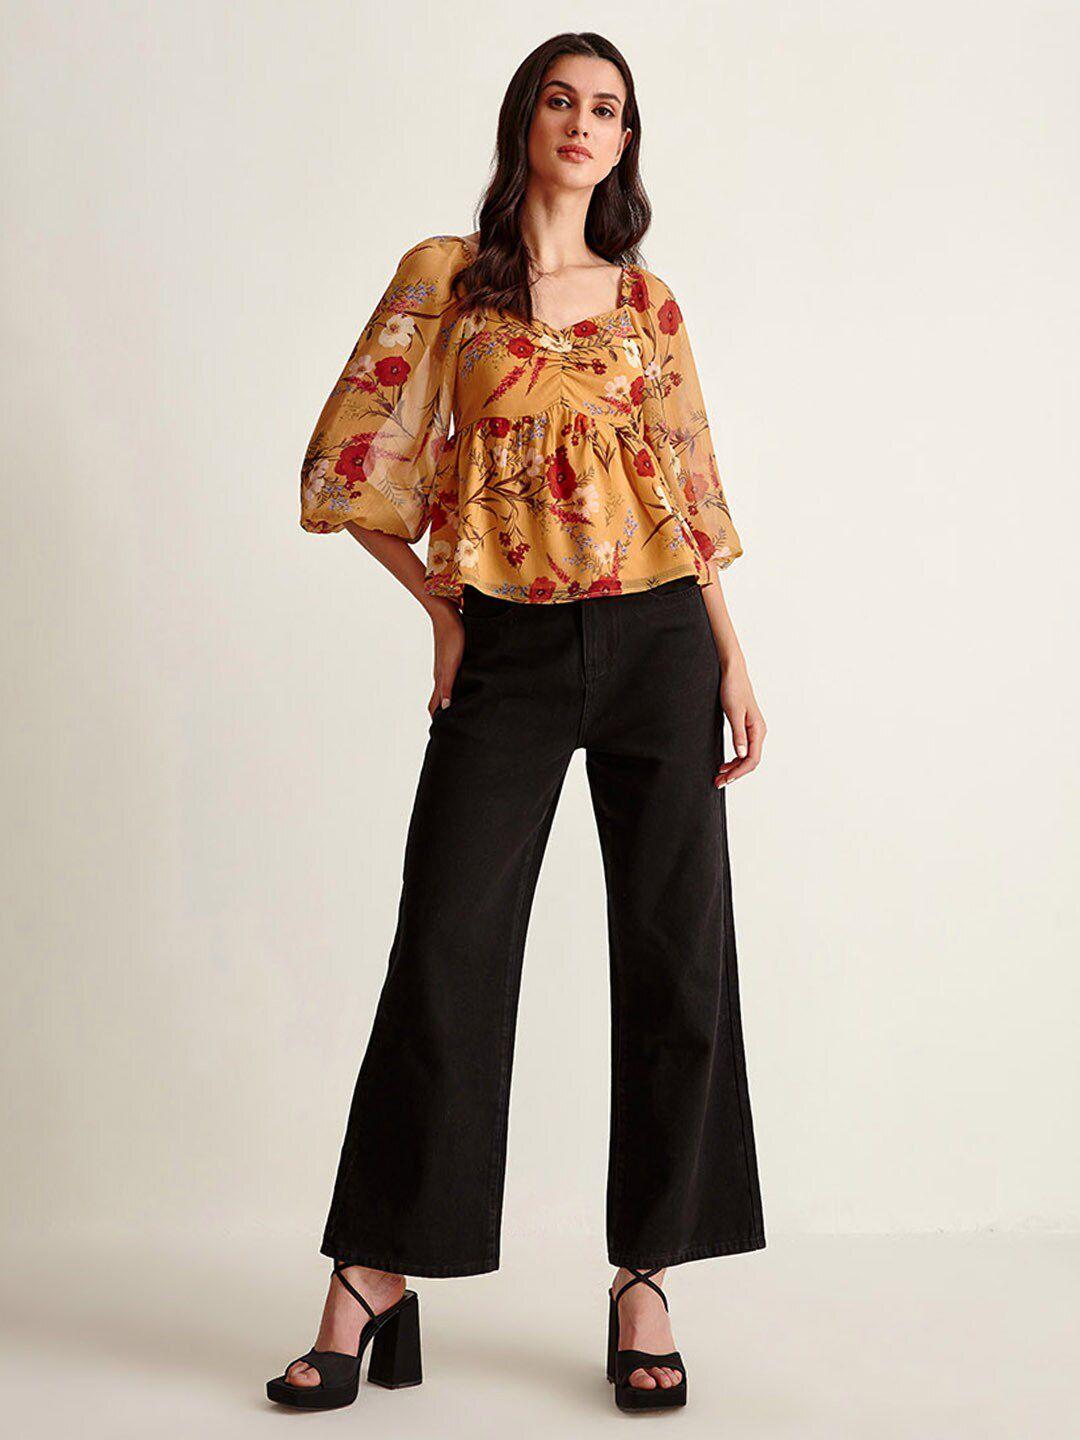 cover story mustard yellow & red floral printed sweetheart neck top